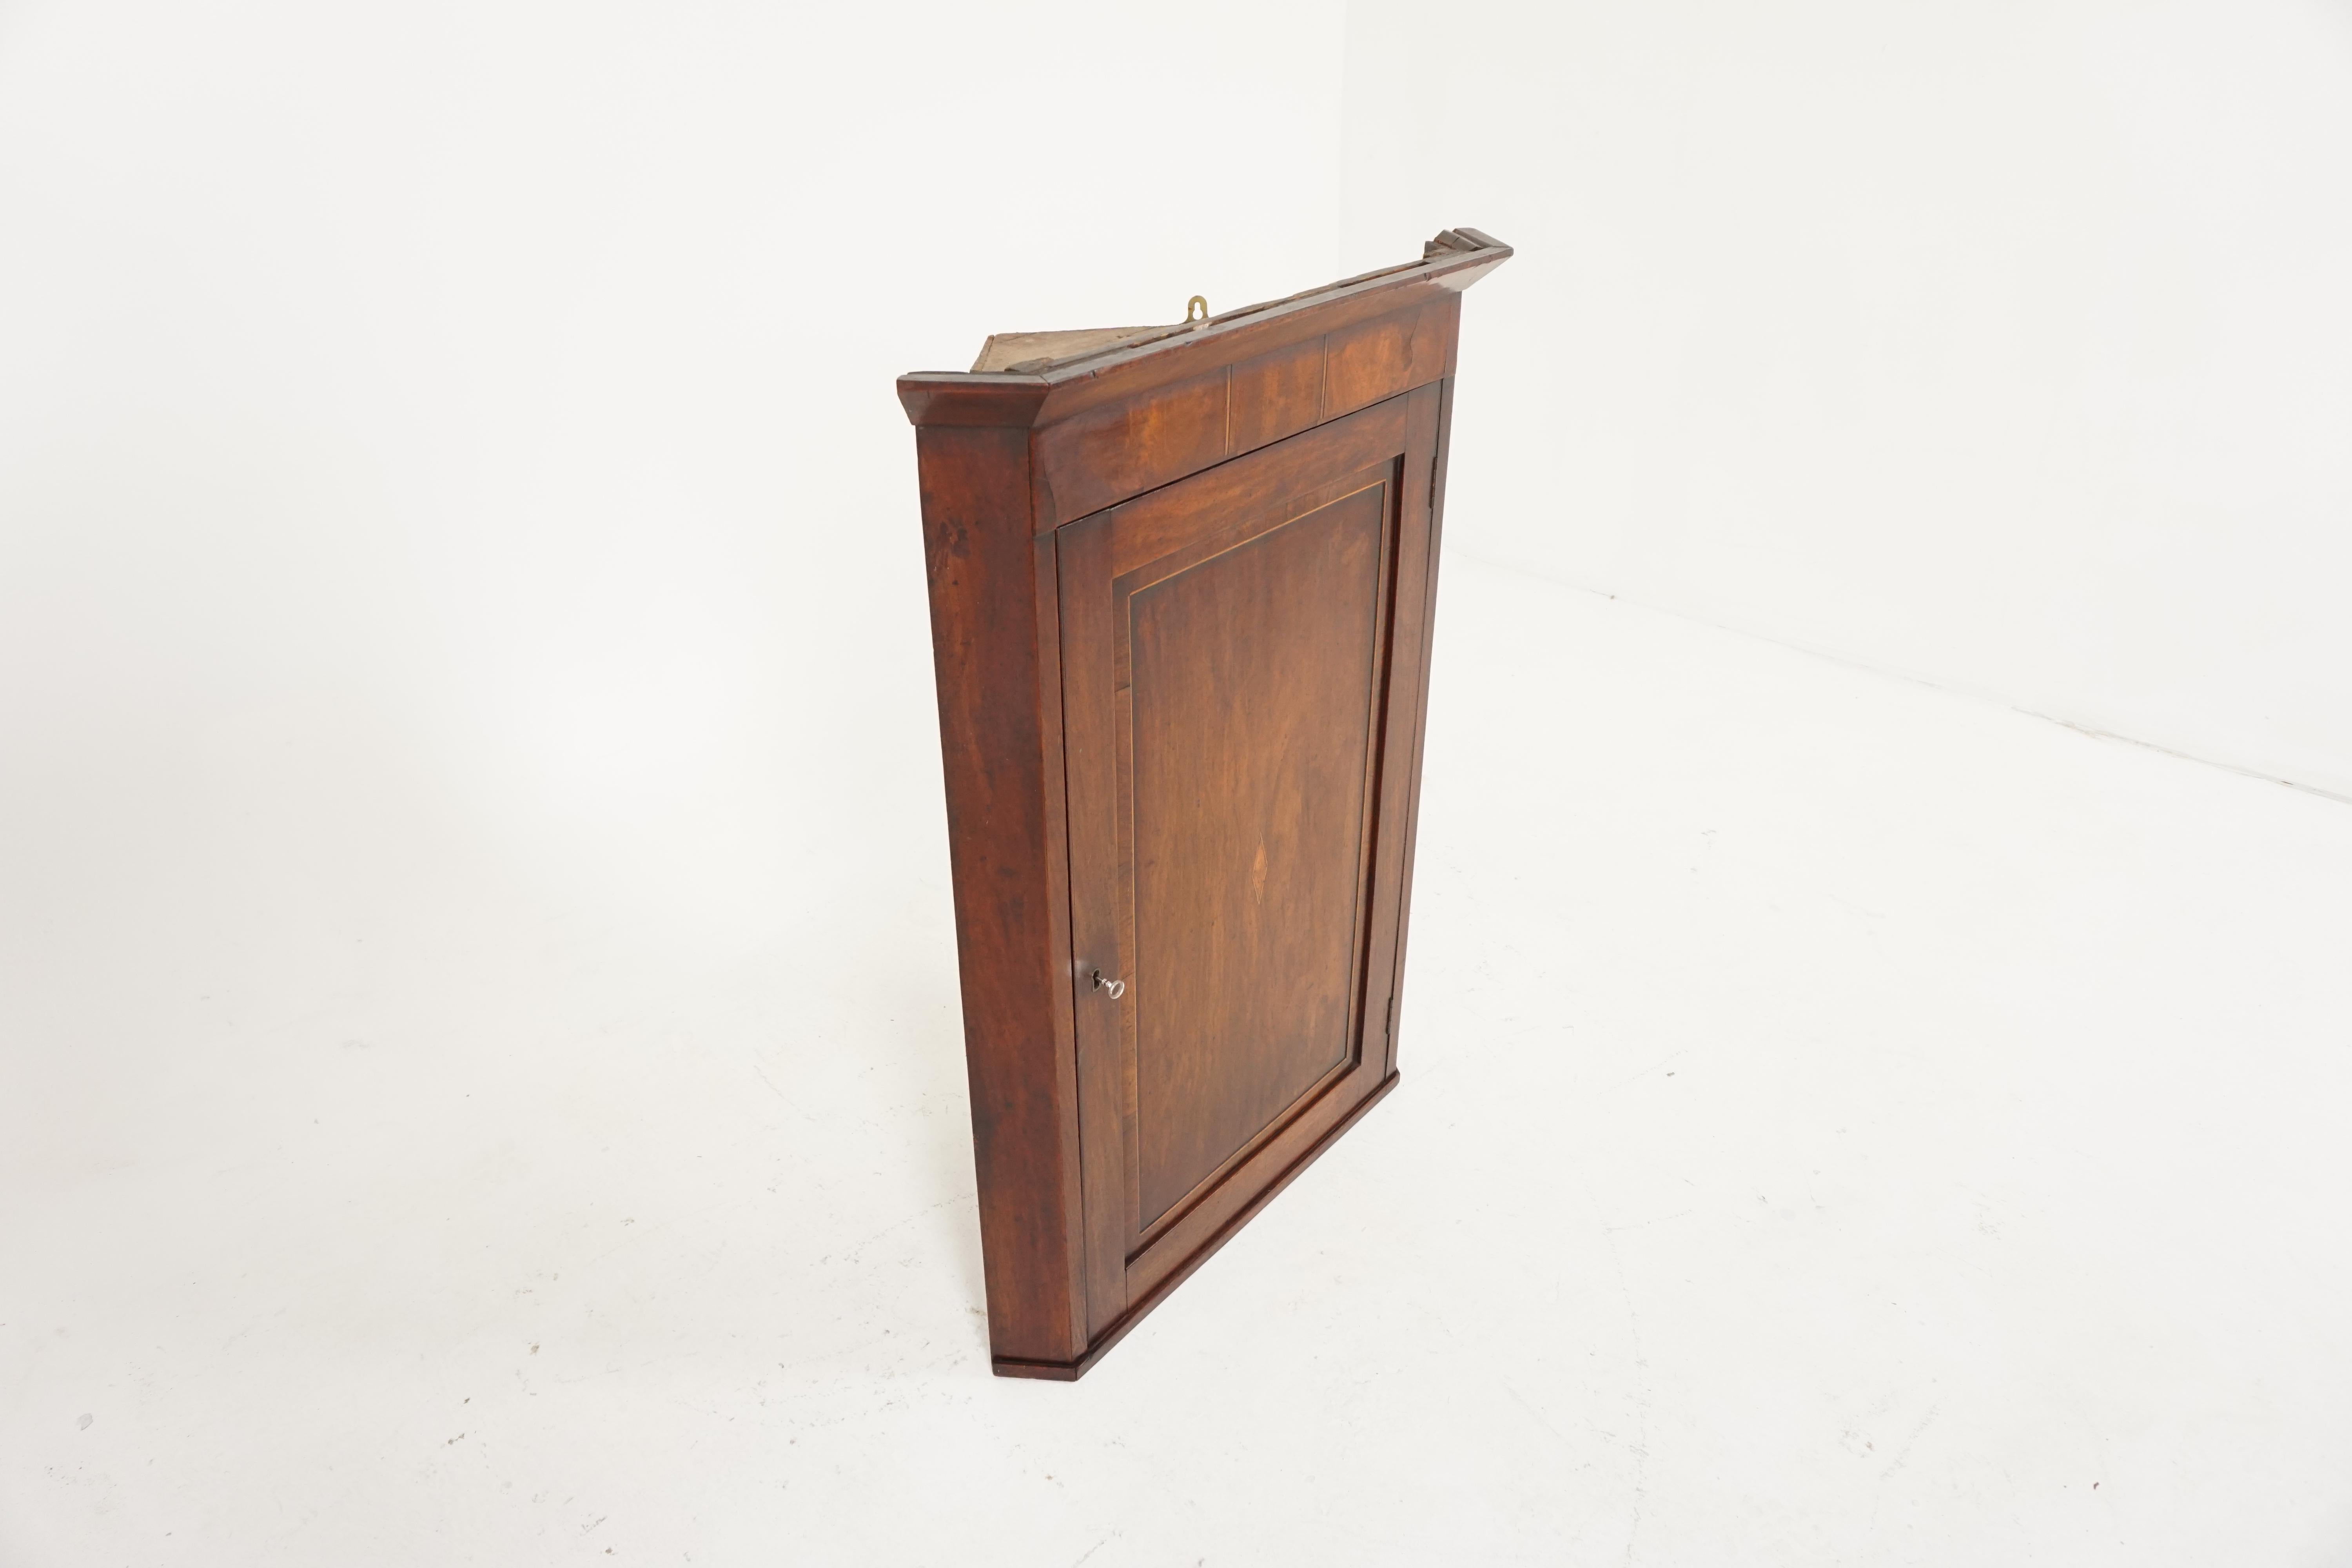 Antique walnut cabinet, Georgian inlaid hanging corner cabinet, Antique Furniture, Scotland 1810, B1816

Scotland 1810
Walnut and veneers
Original finish
Detailed cornice above
Slightly canted corners
Paneled door with inlay on the